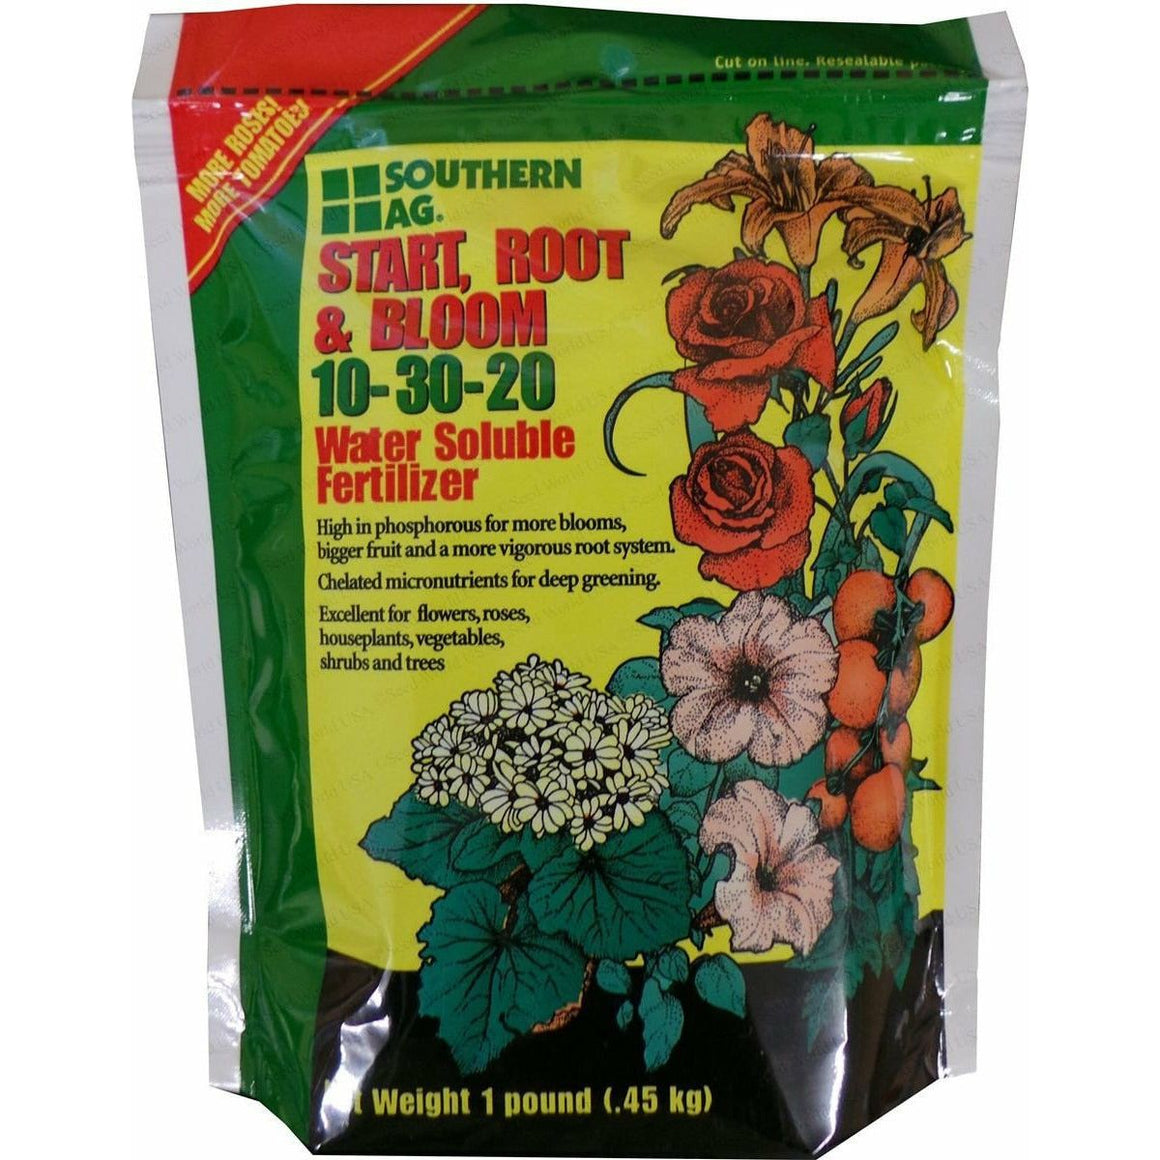 Start, Root and Bloom 10-30-20 Water Soluble Fertilizer - 1 Lb. - Seed World